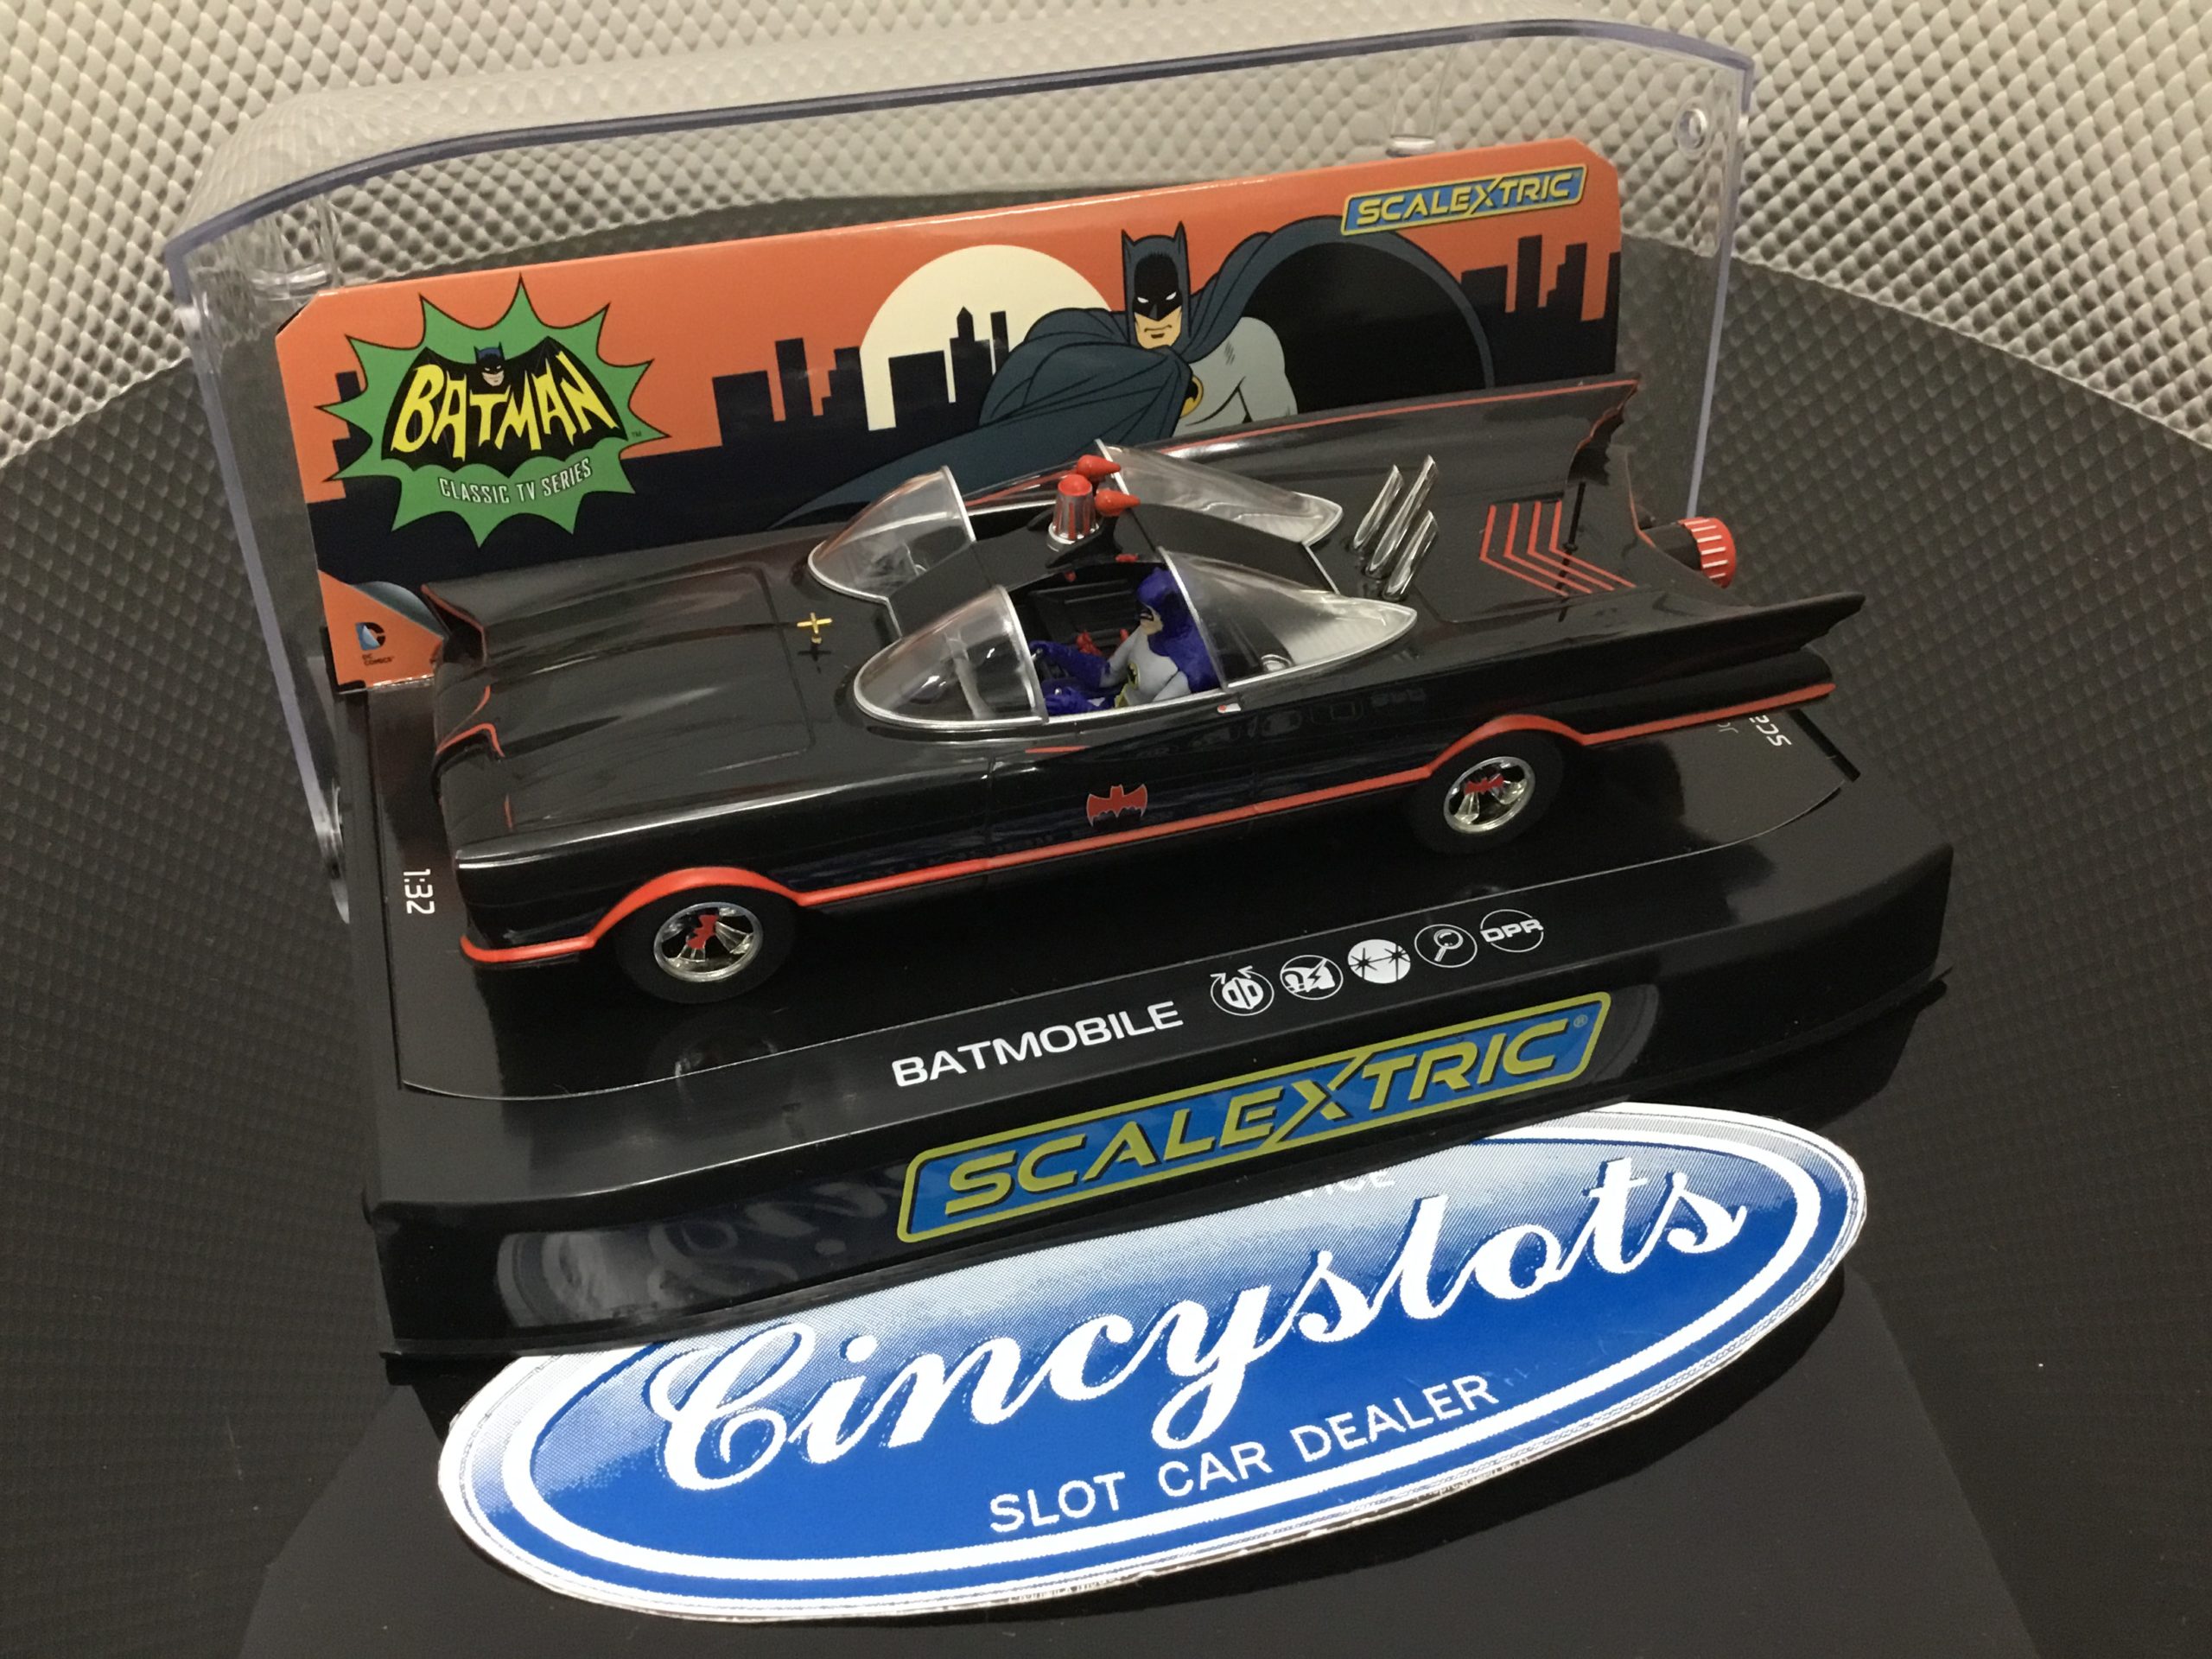 Scalextric C4175T Batmobile 1966 TV Barris  1/32 Scale Slot Car SOLD OUT!